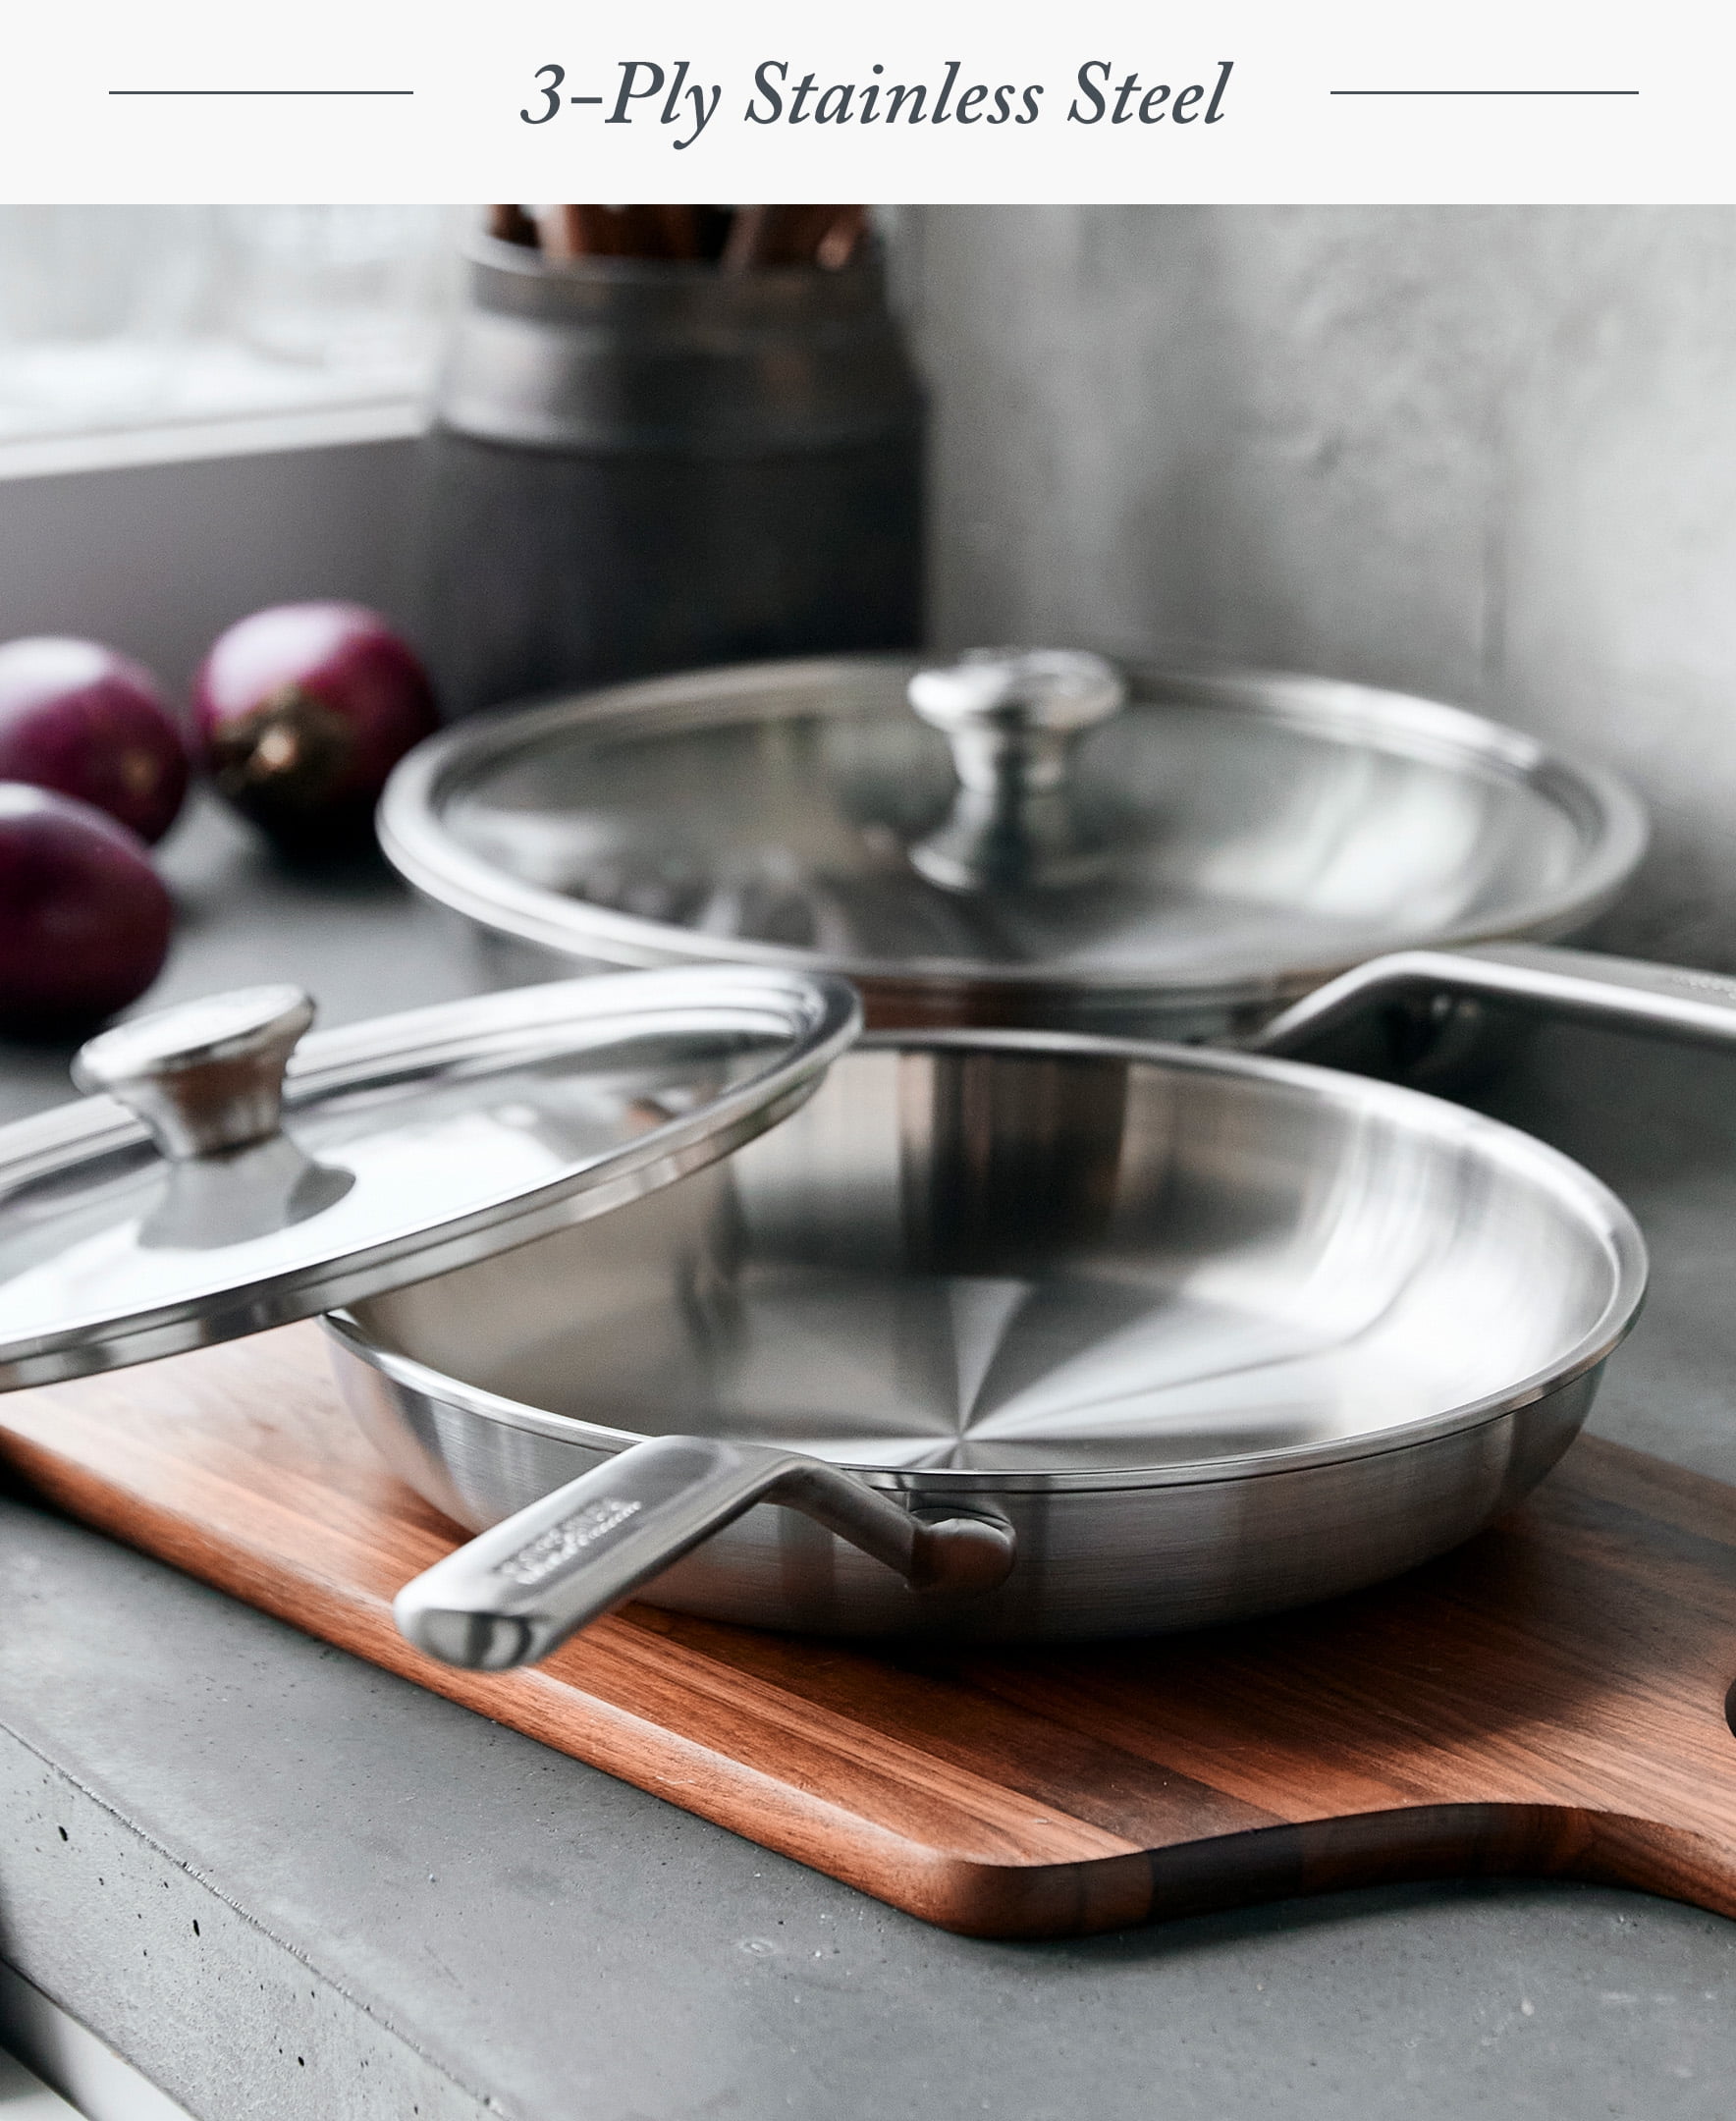 Merten & Storck Tri-Ply Stainless Steel Induction 10 Frying Pan Skillet, Multi Clad, Oven Safe, Silver